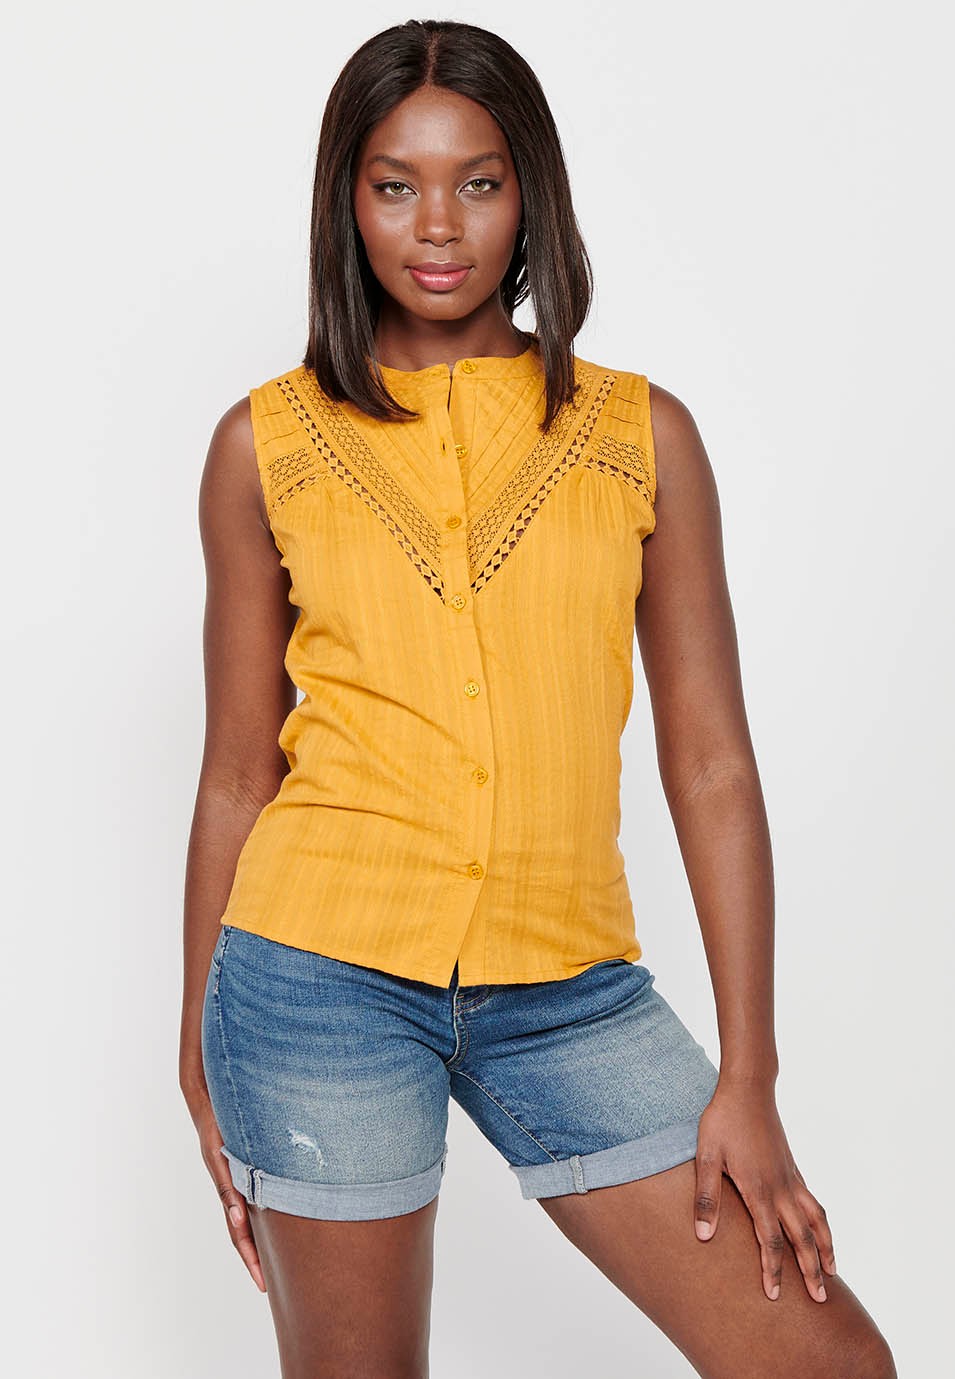 Sleeveless Cotton Blouse with Round Neck and Front Closure with Buttons and Embroidered Details in Mustard Color for Women 5